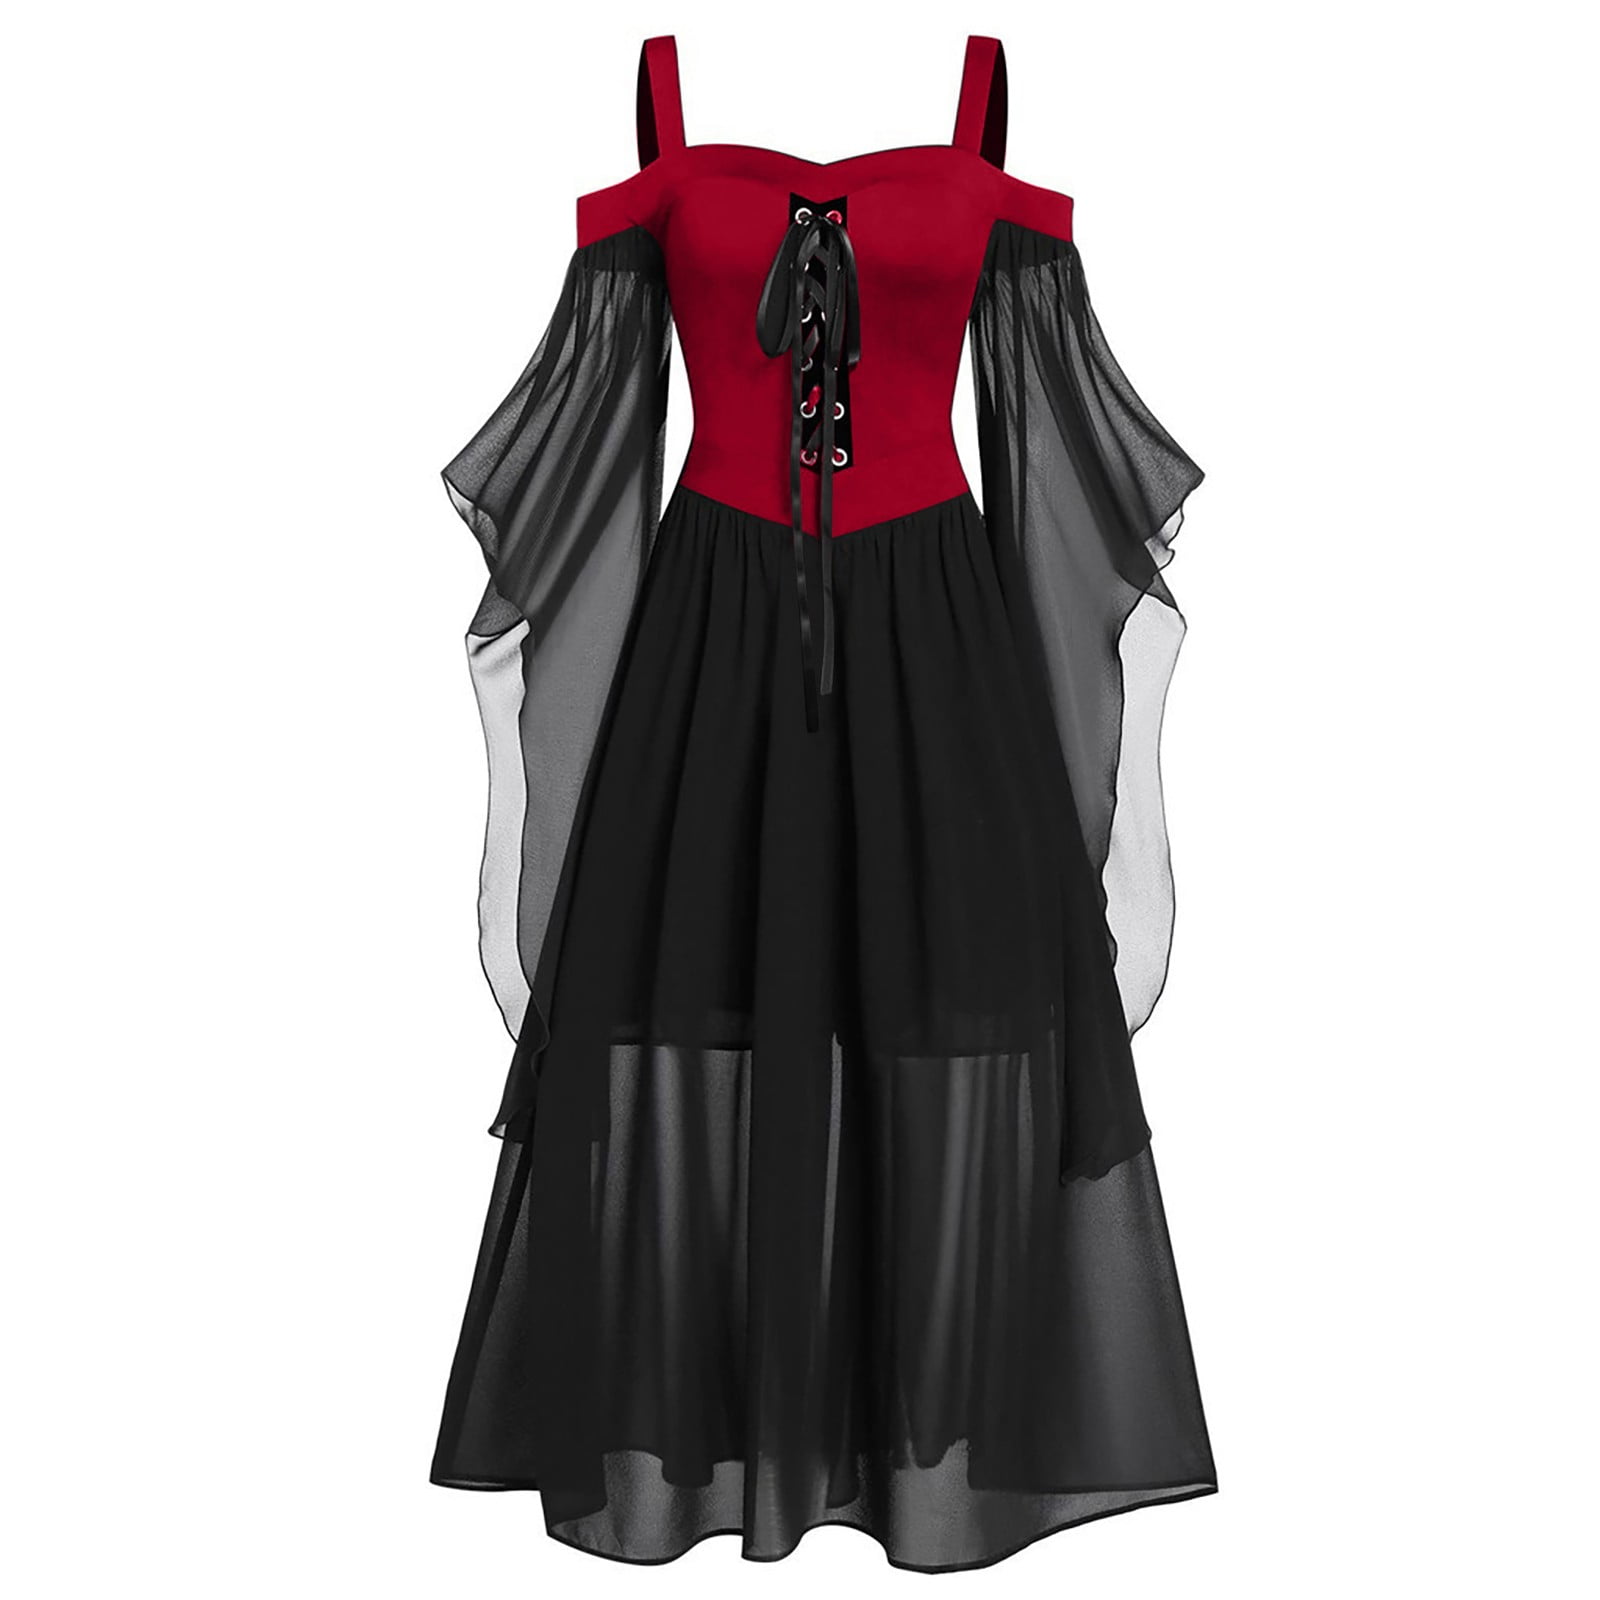  Halloween Gothic Dress for Women Plus Size Goth Dresses  Butterfly Sleeve Cosplay Dress Mesh Medieval Costume Evening Dress :  Clothing, Shoes & Jewelry